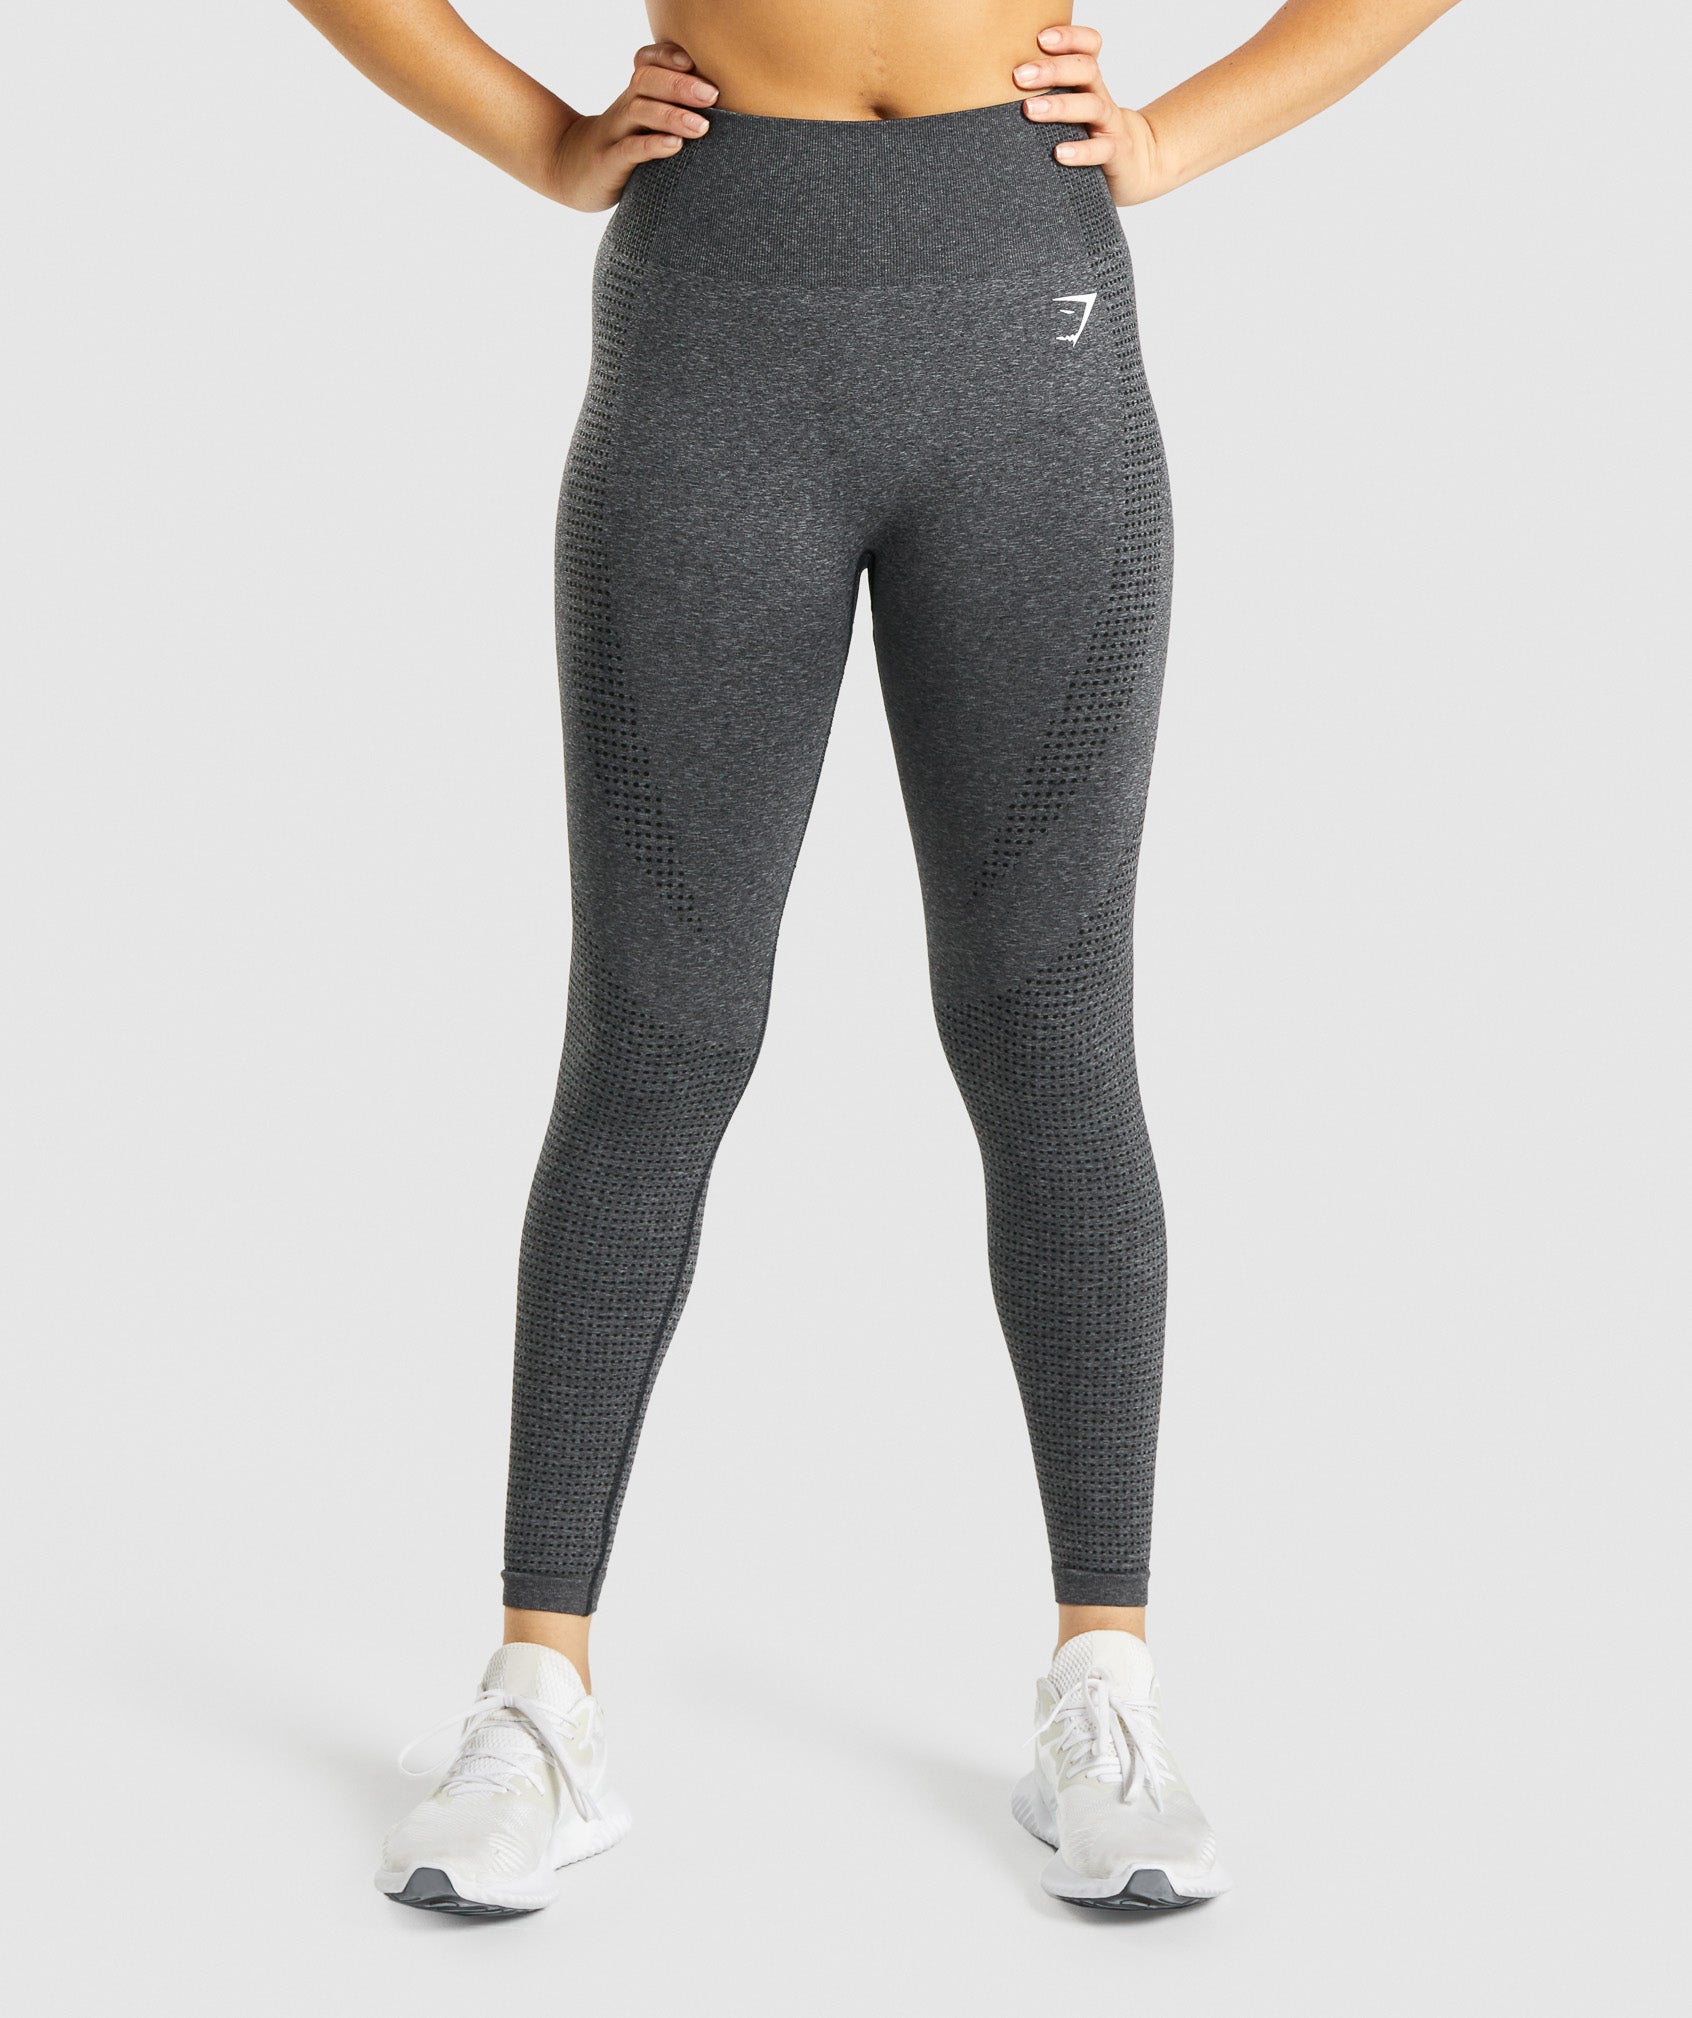 Gymshark Fit Seamless Legging ONLY in charcoal gray, Women's Fashion,  Activewear on Carousell